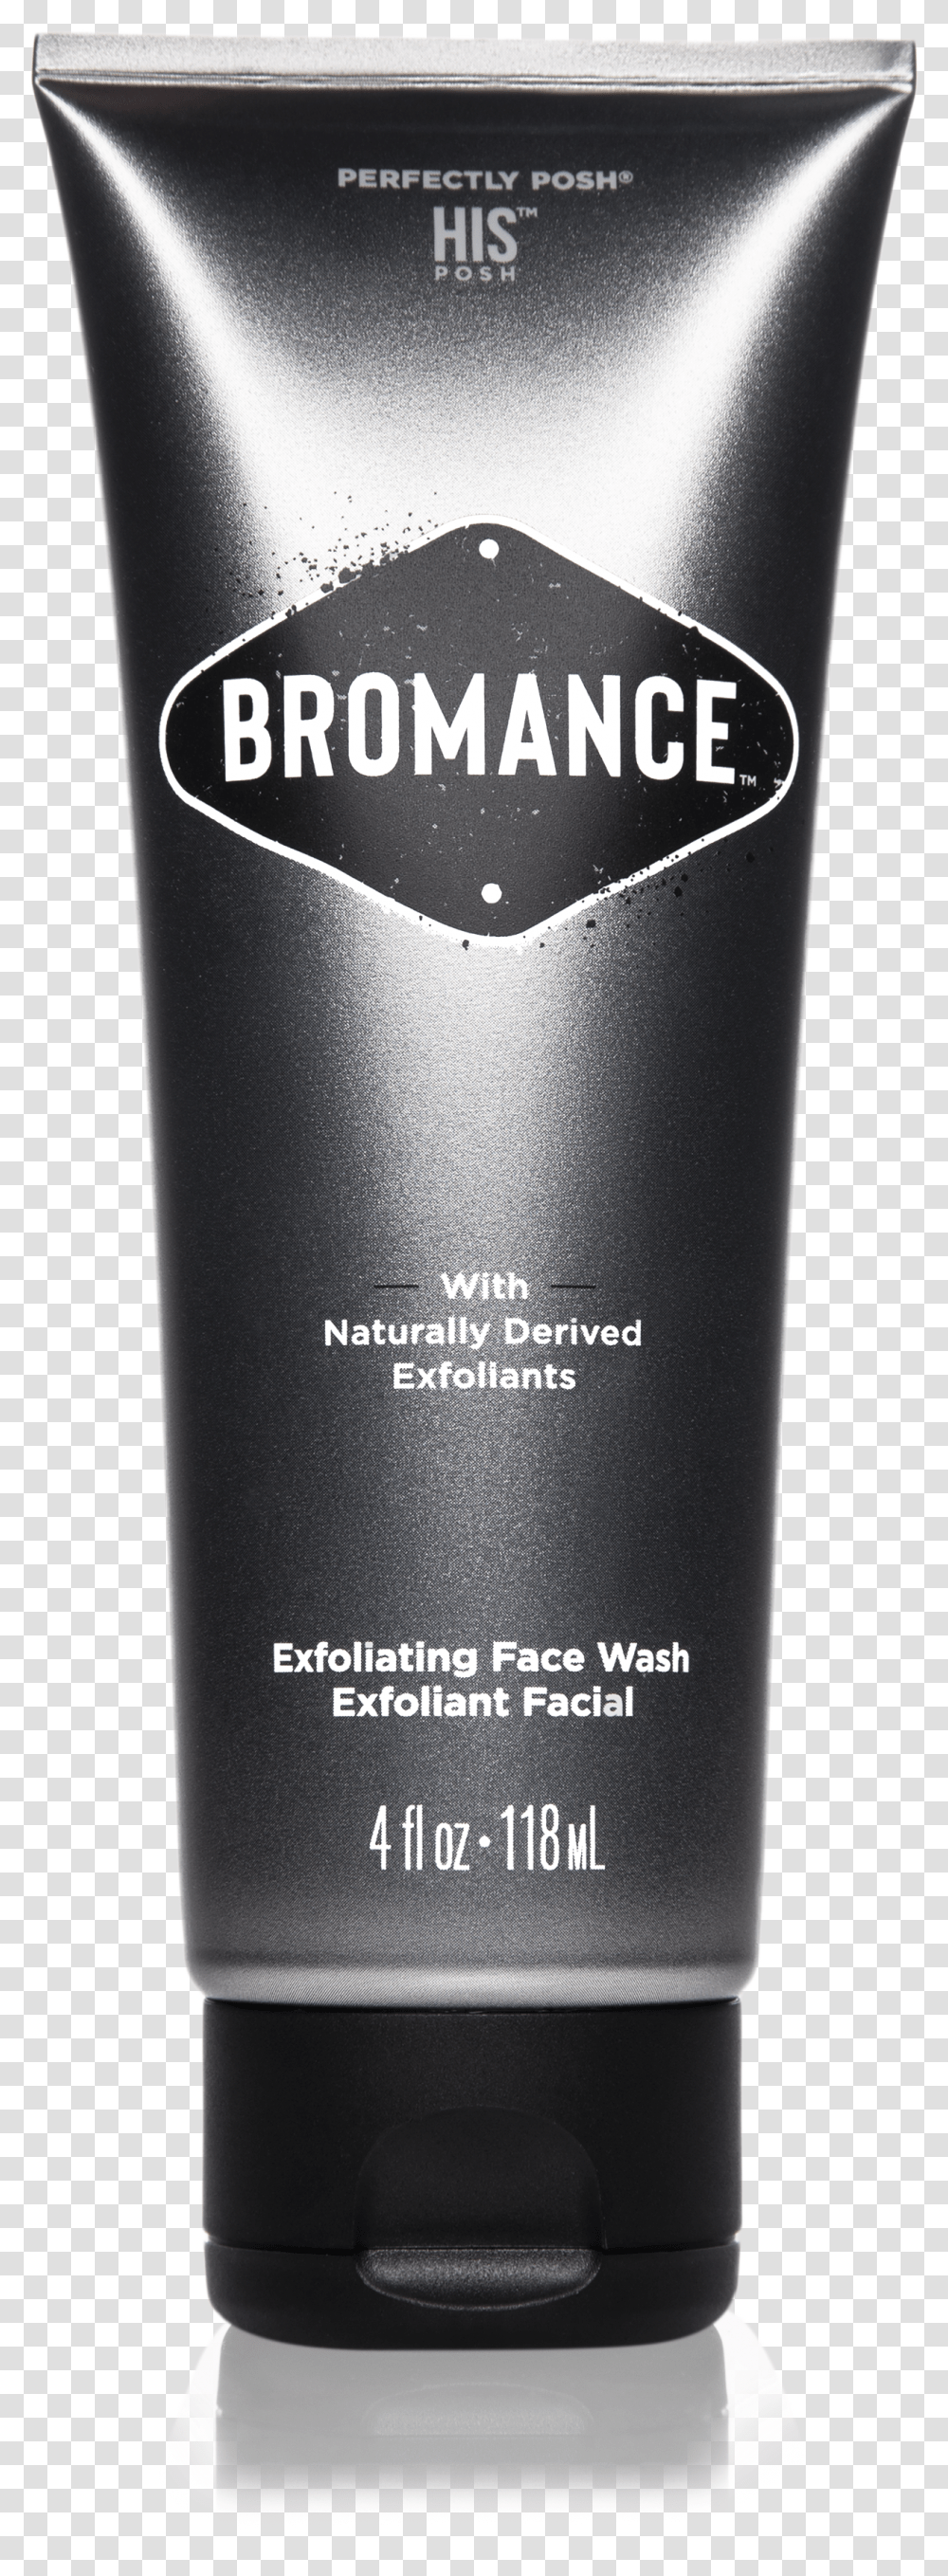 Perfectly Posh Bromance Face Wash Cosmetics Transparent Png